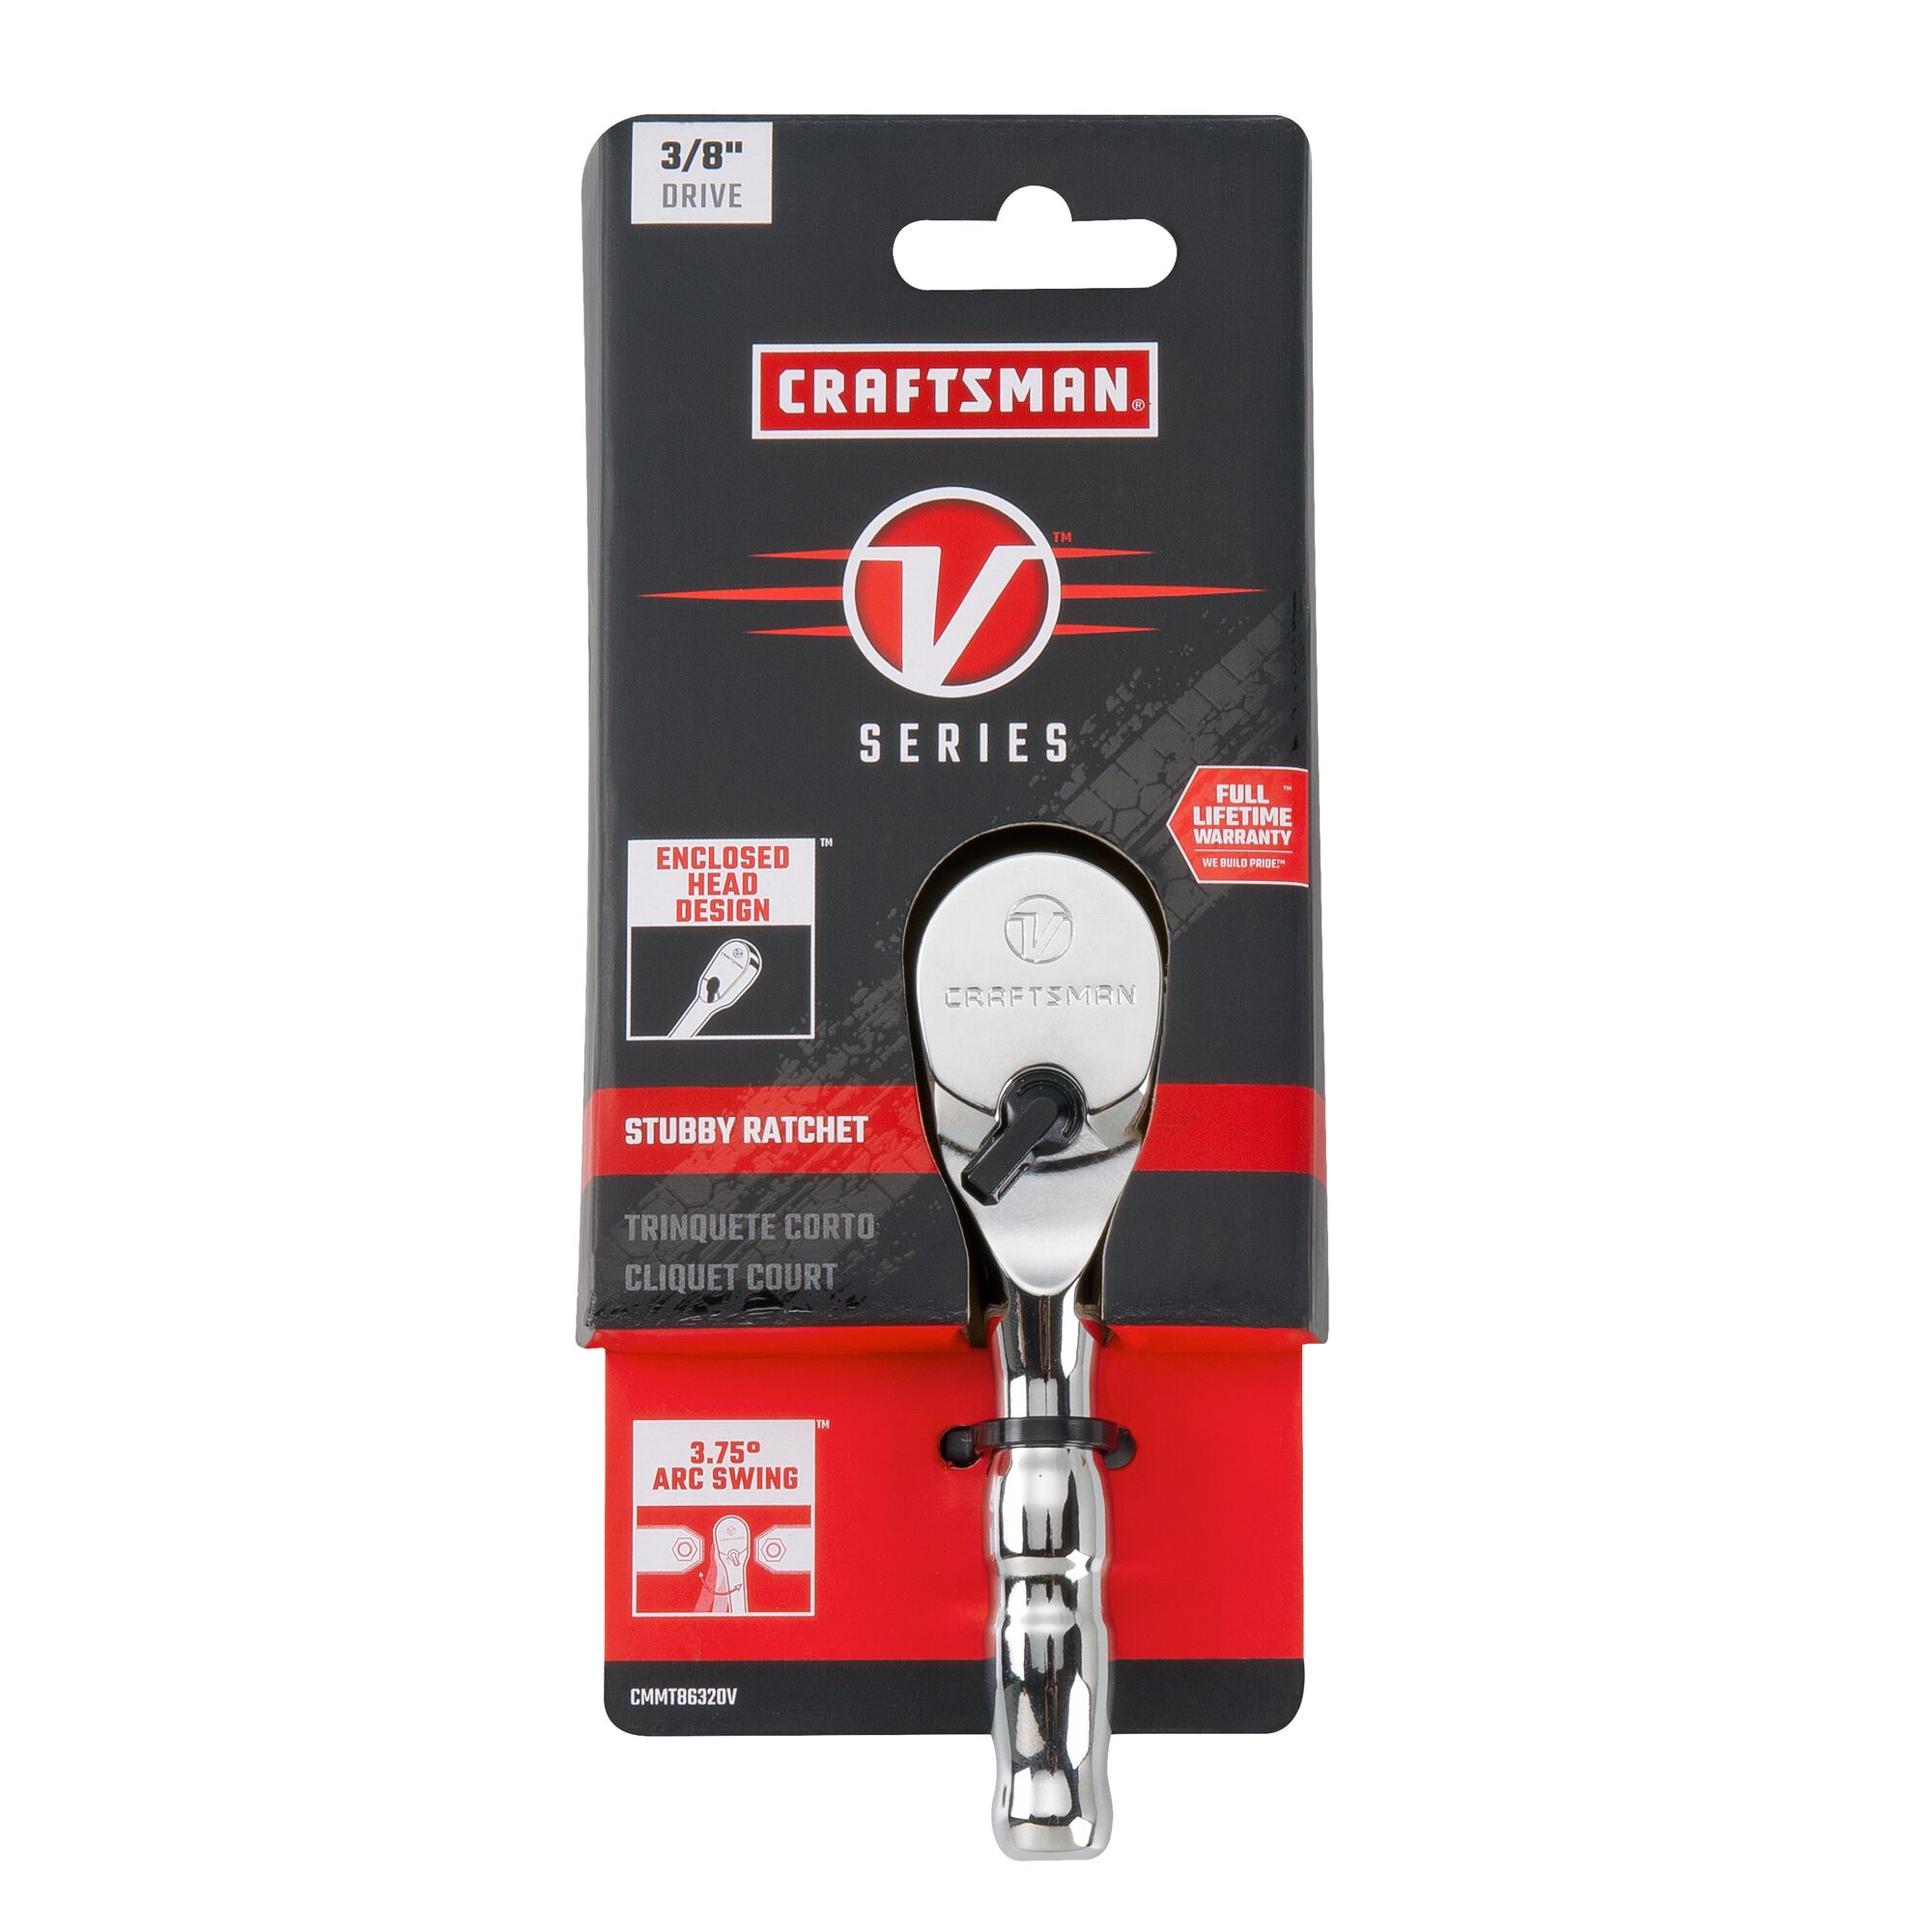 V series three eighth inch drive stubby ratchet in packaging.